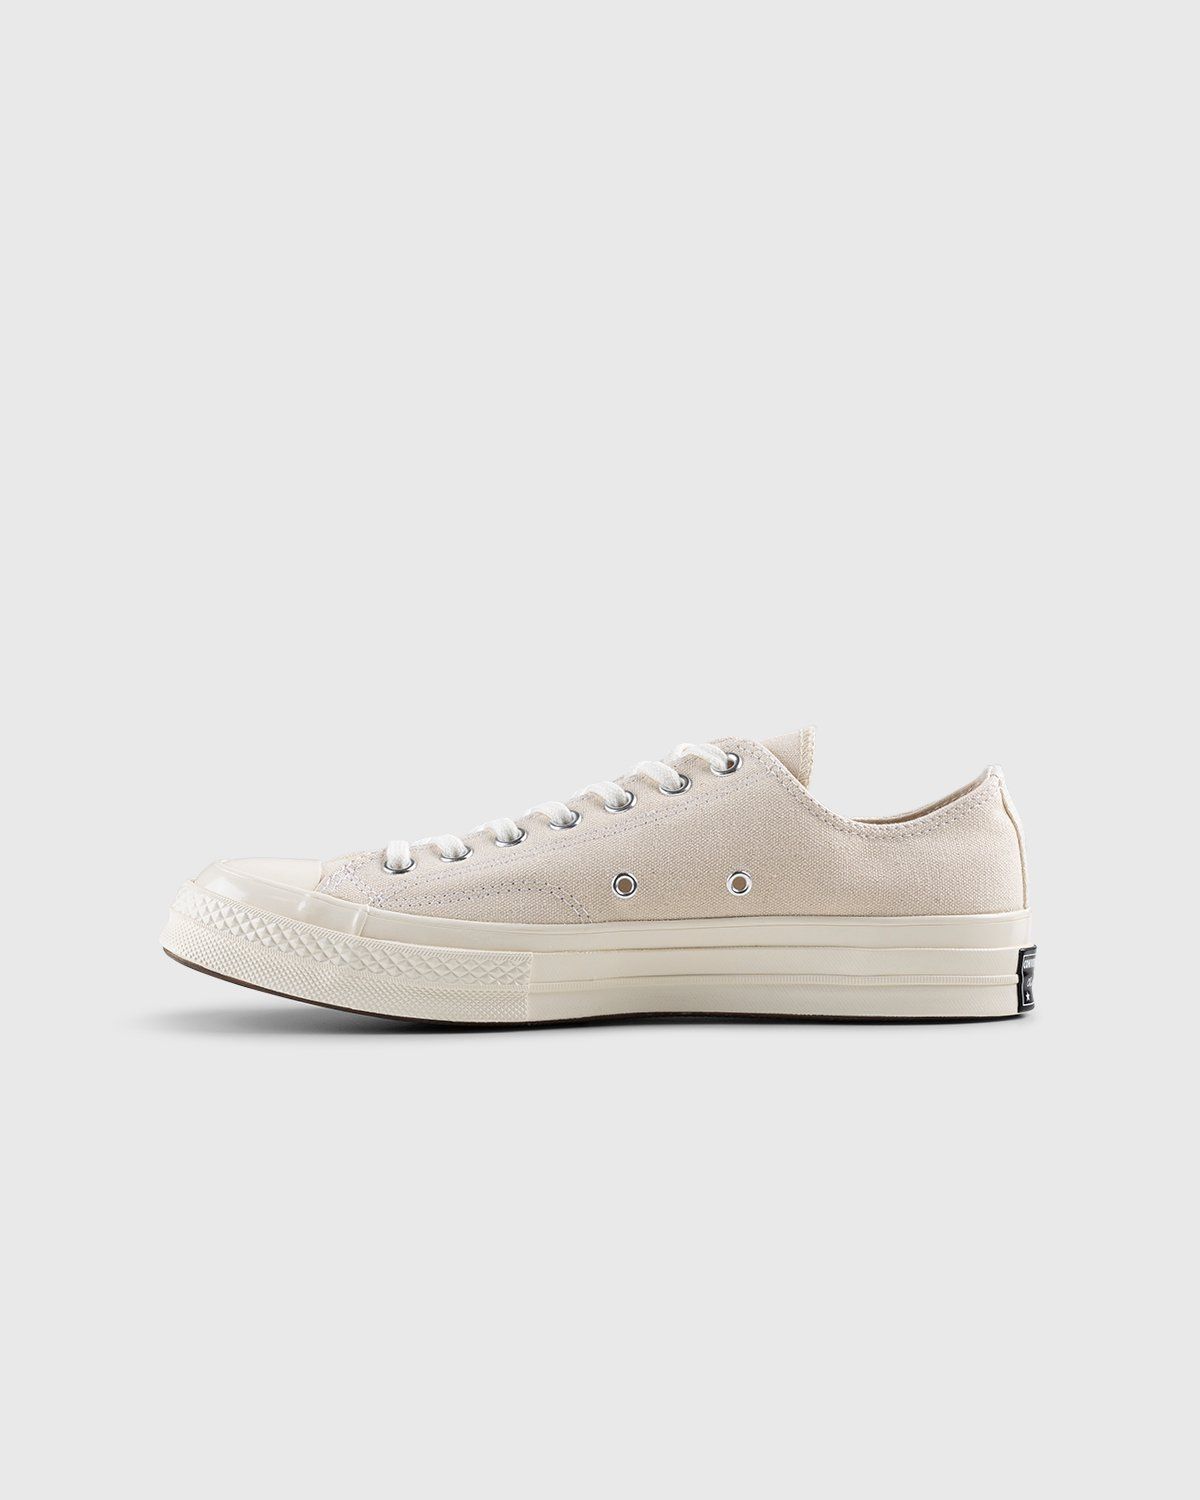 Converse – Chuck 70 Ox Natural/Black/Egret - Low Top Sneakers - Beige - Image 2